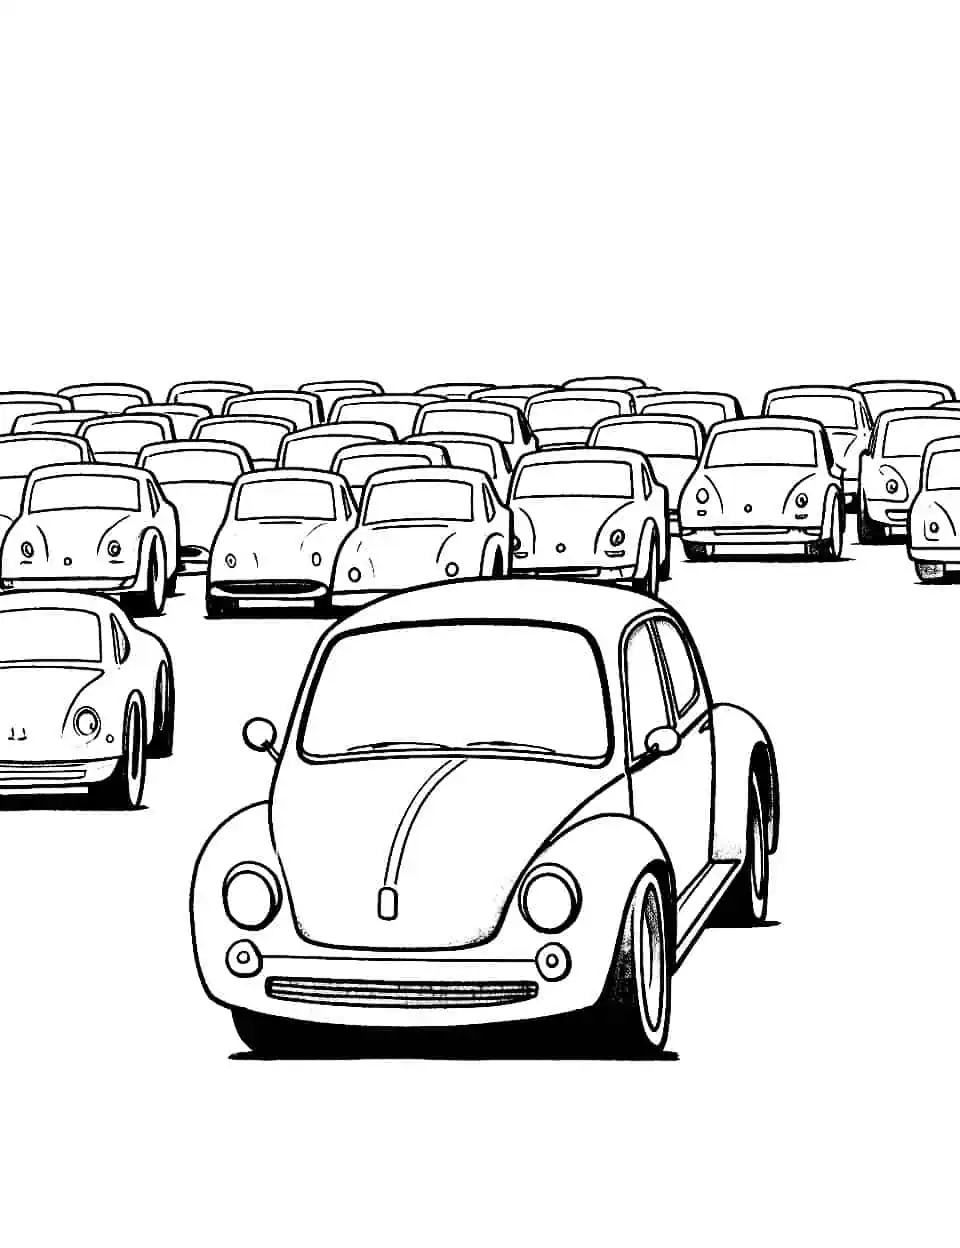 Classic Volkswagen Car Coloring Page - A collection of the classic Volkswagen beetle car waiting to be colored.